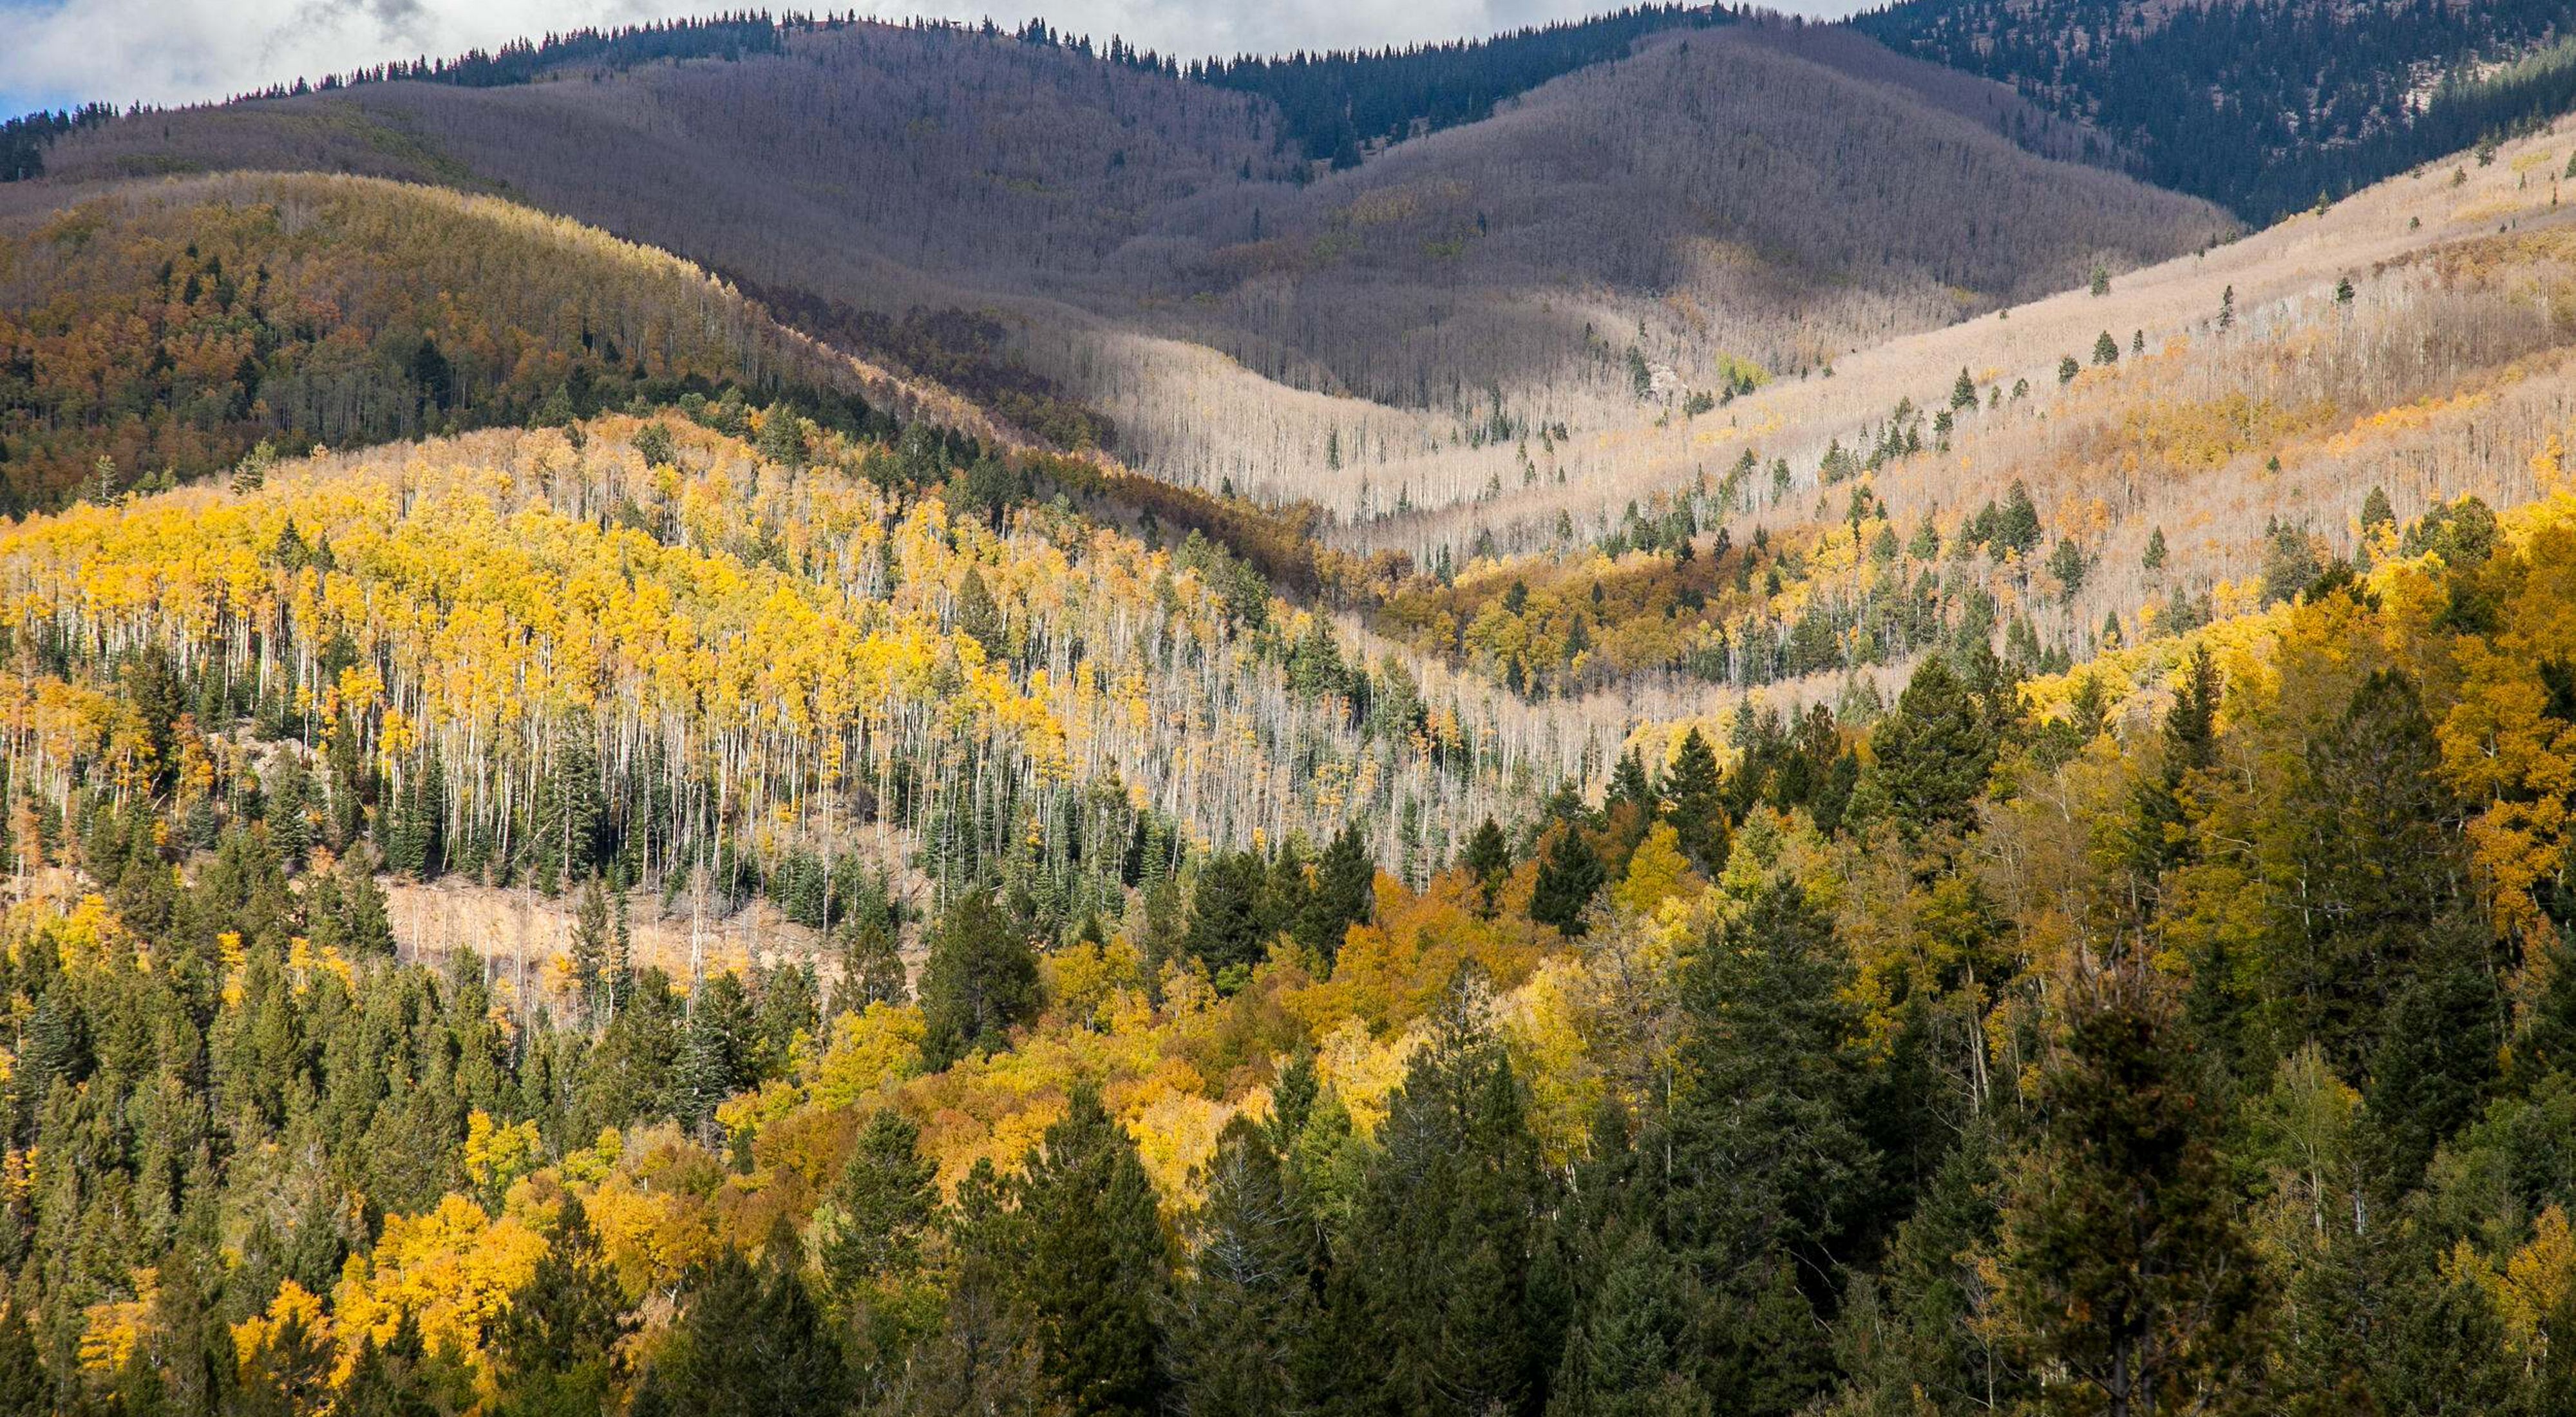 View of rolling hills covered in autumn-colored forests.